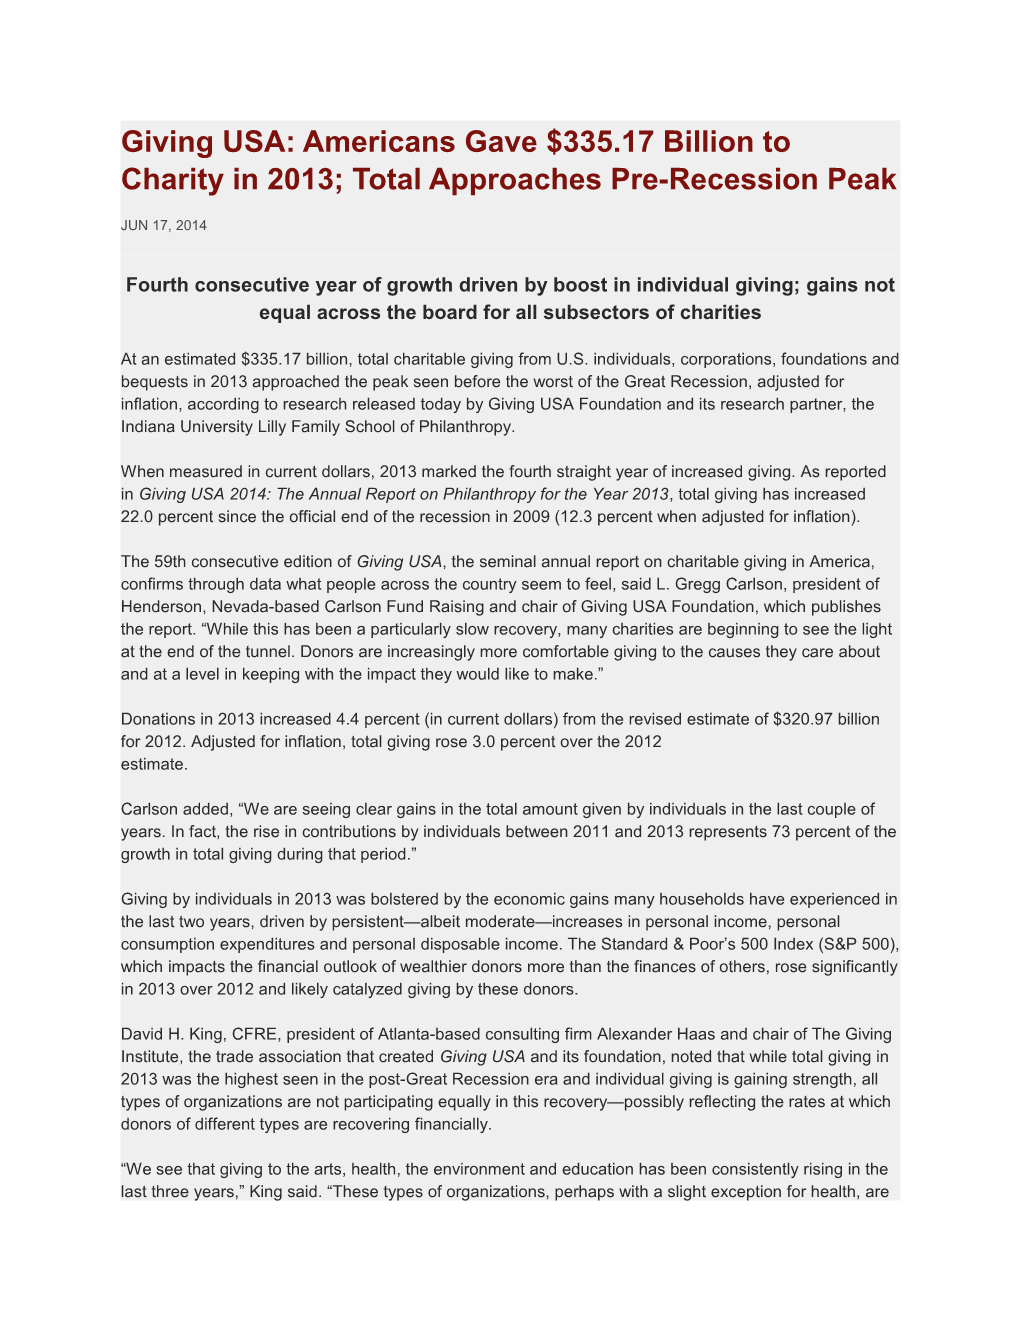 Giving USA: Americans Gave $335.17 Billion to Charity in 2013; Total Approaches Pre-Recession